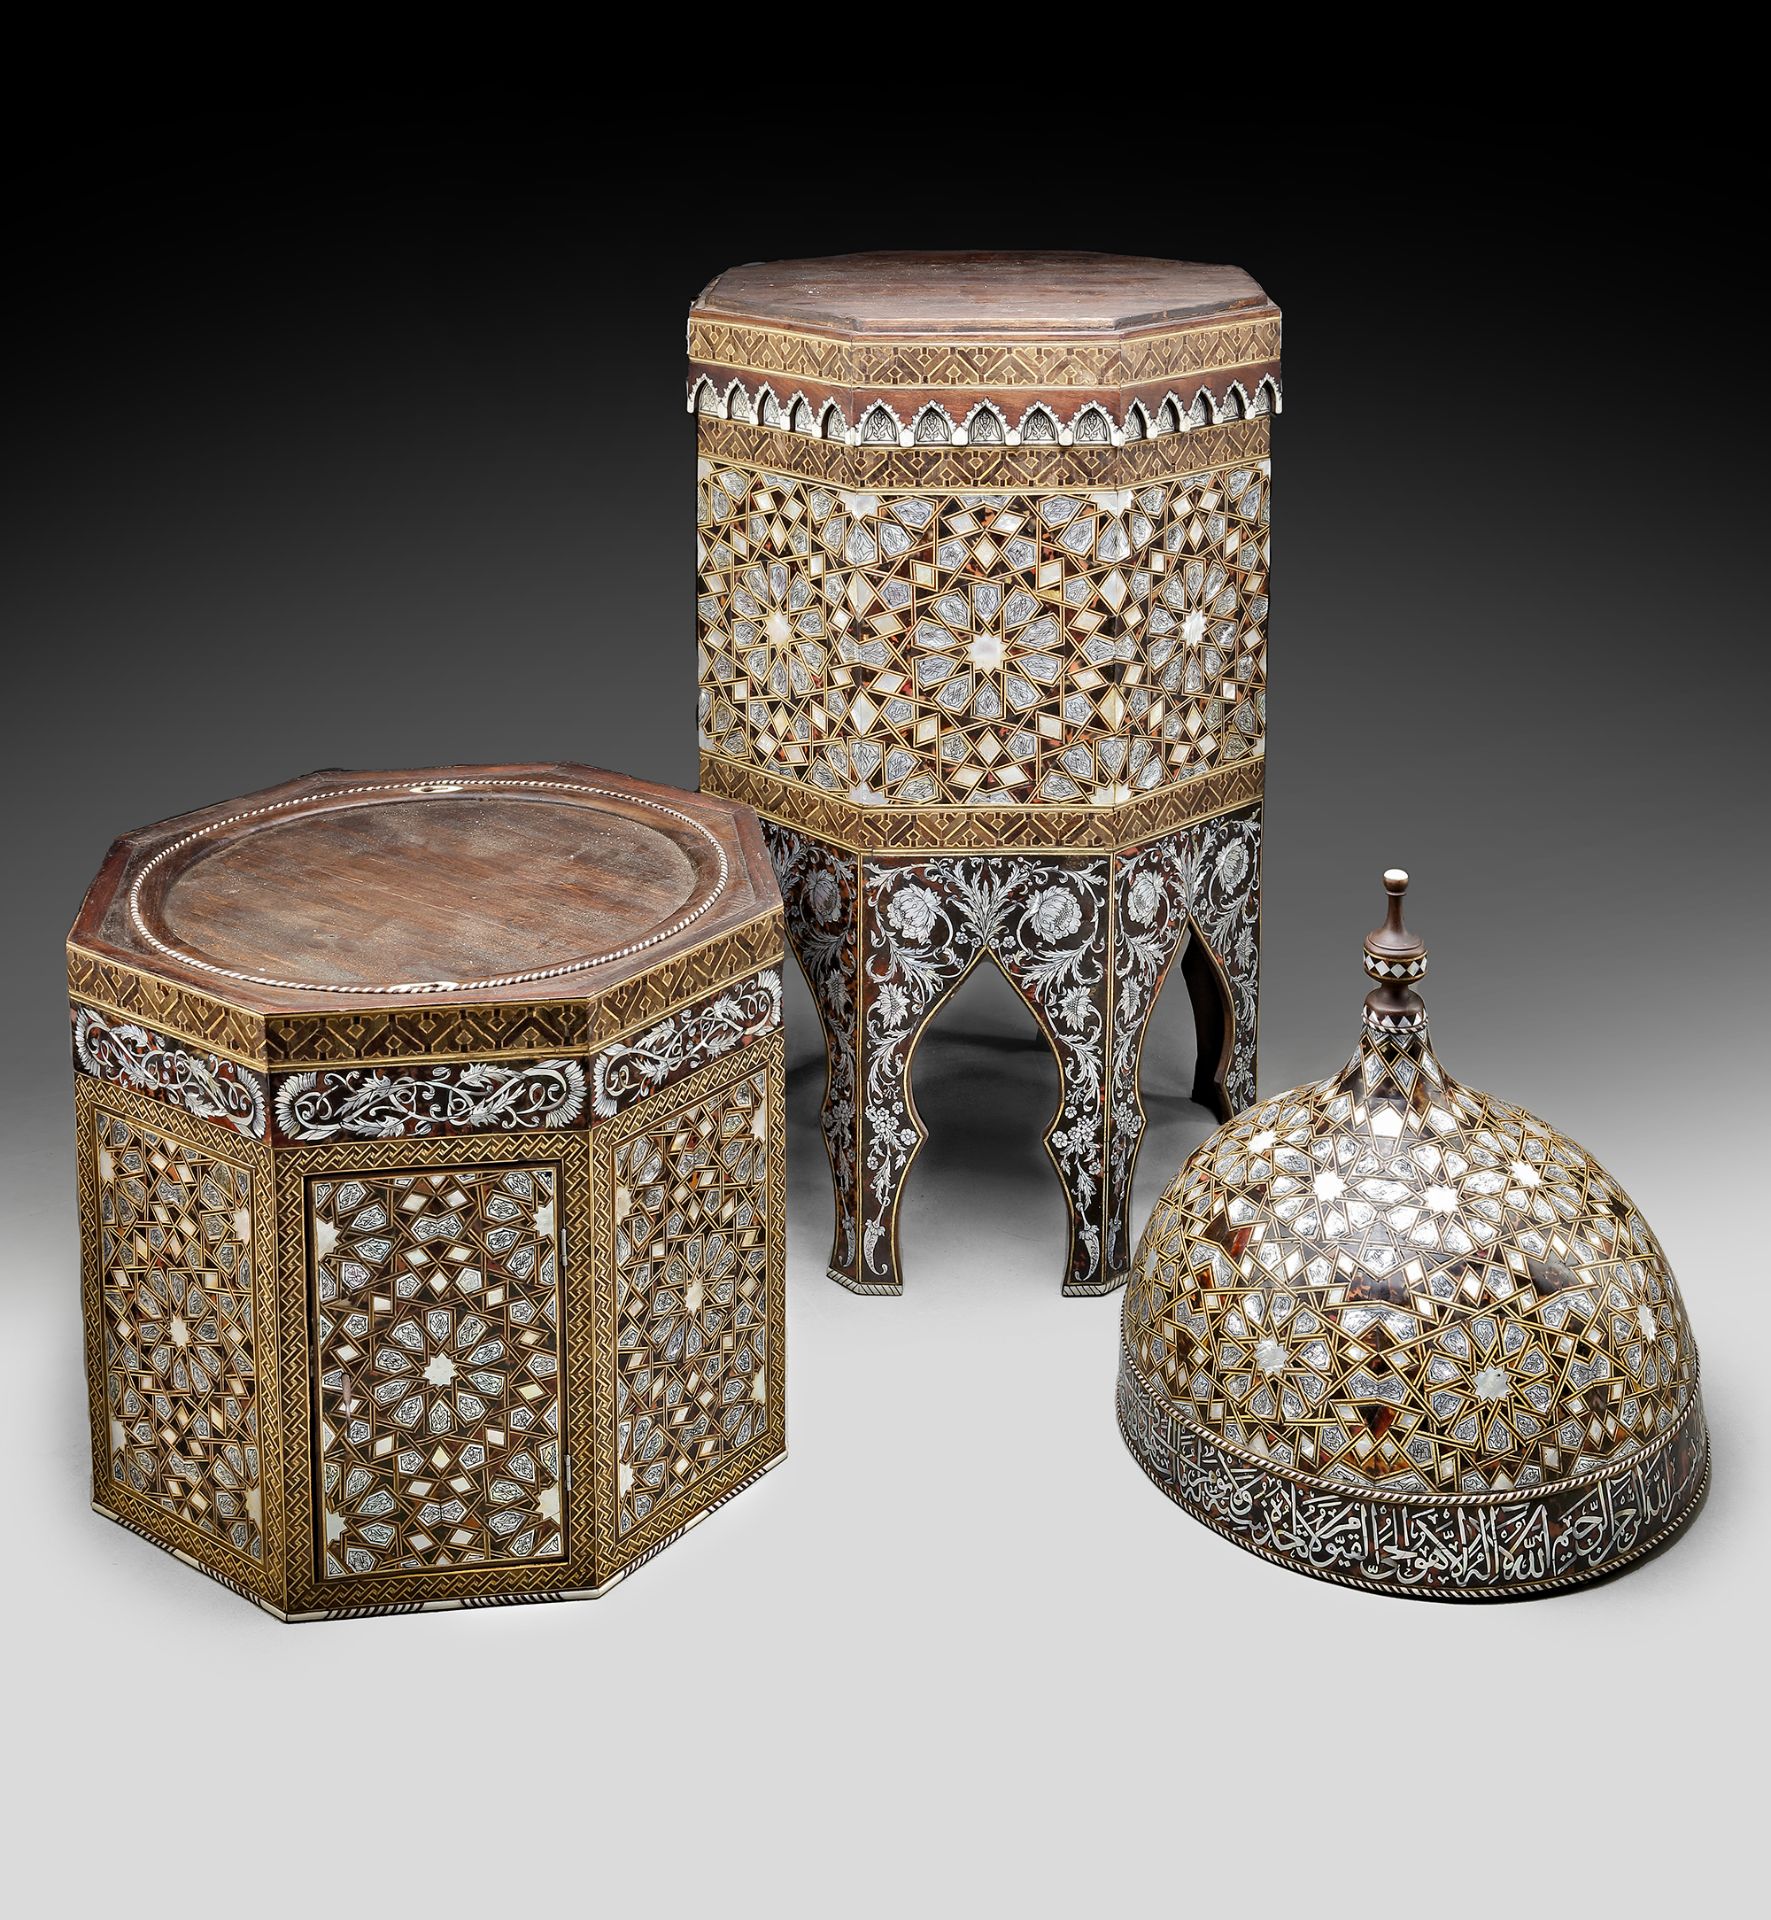 A TORTOISESHELL AND MOTHER-OF-PEARL OCTAGONAL CABINET, TURKEY OR SYRIA, EARLY 20TH CENTURY - Image 9 of 10